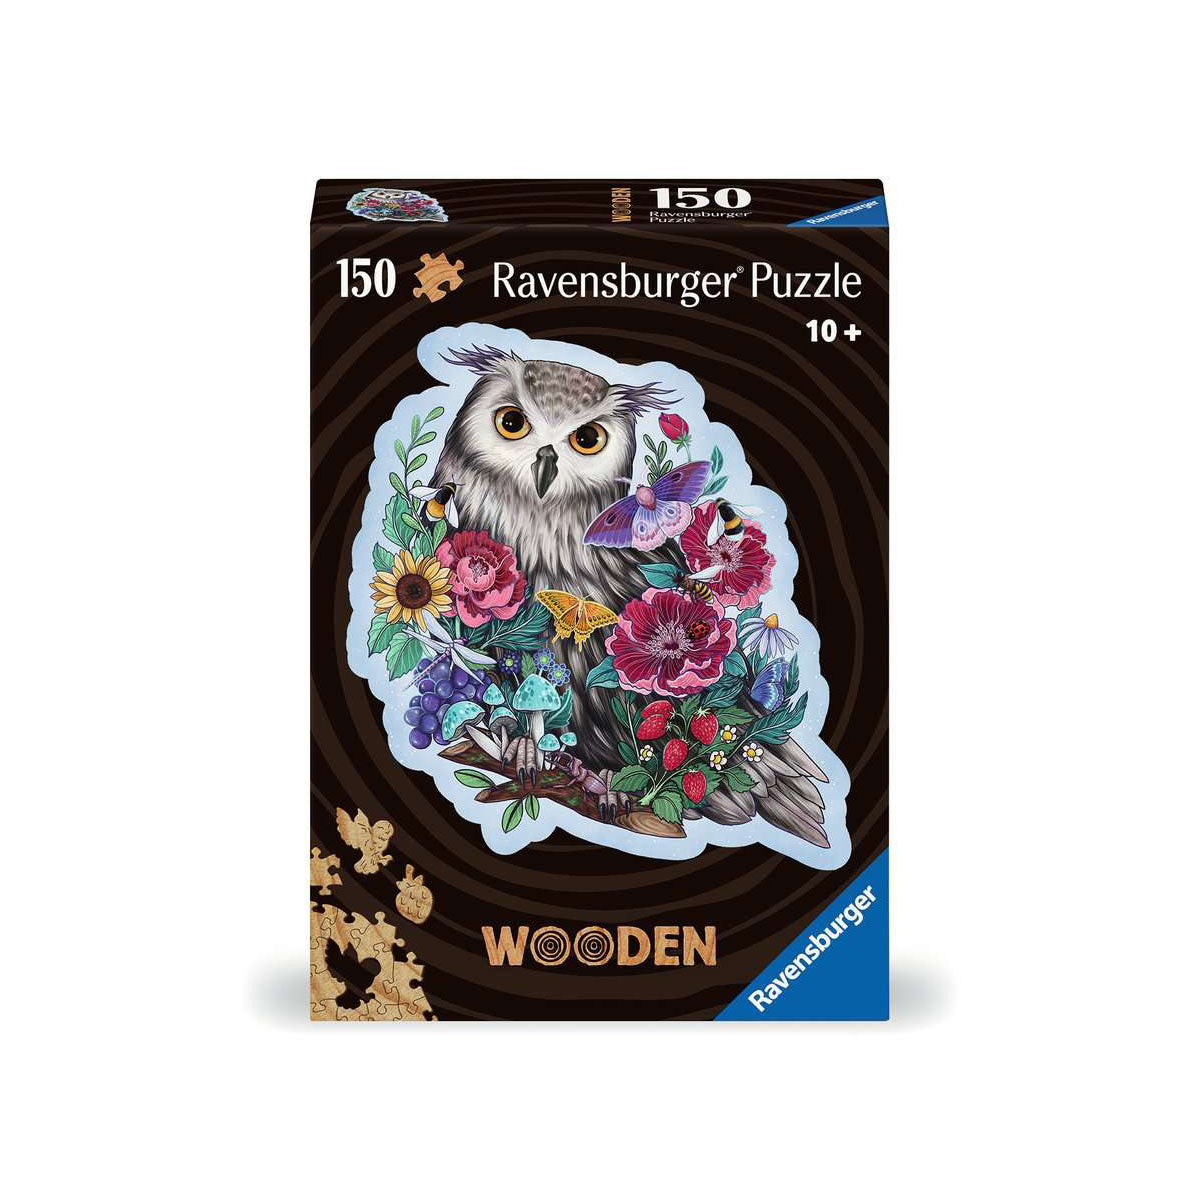 Ravensburger Shaped Wooden Jigsaw Puzzle Mysterious Owl - 150 Piece